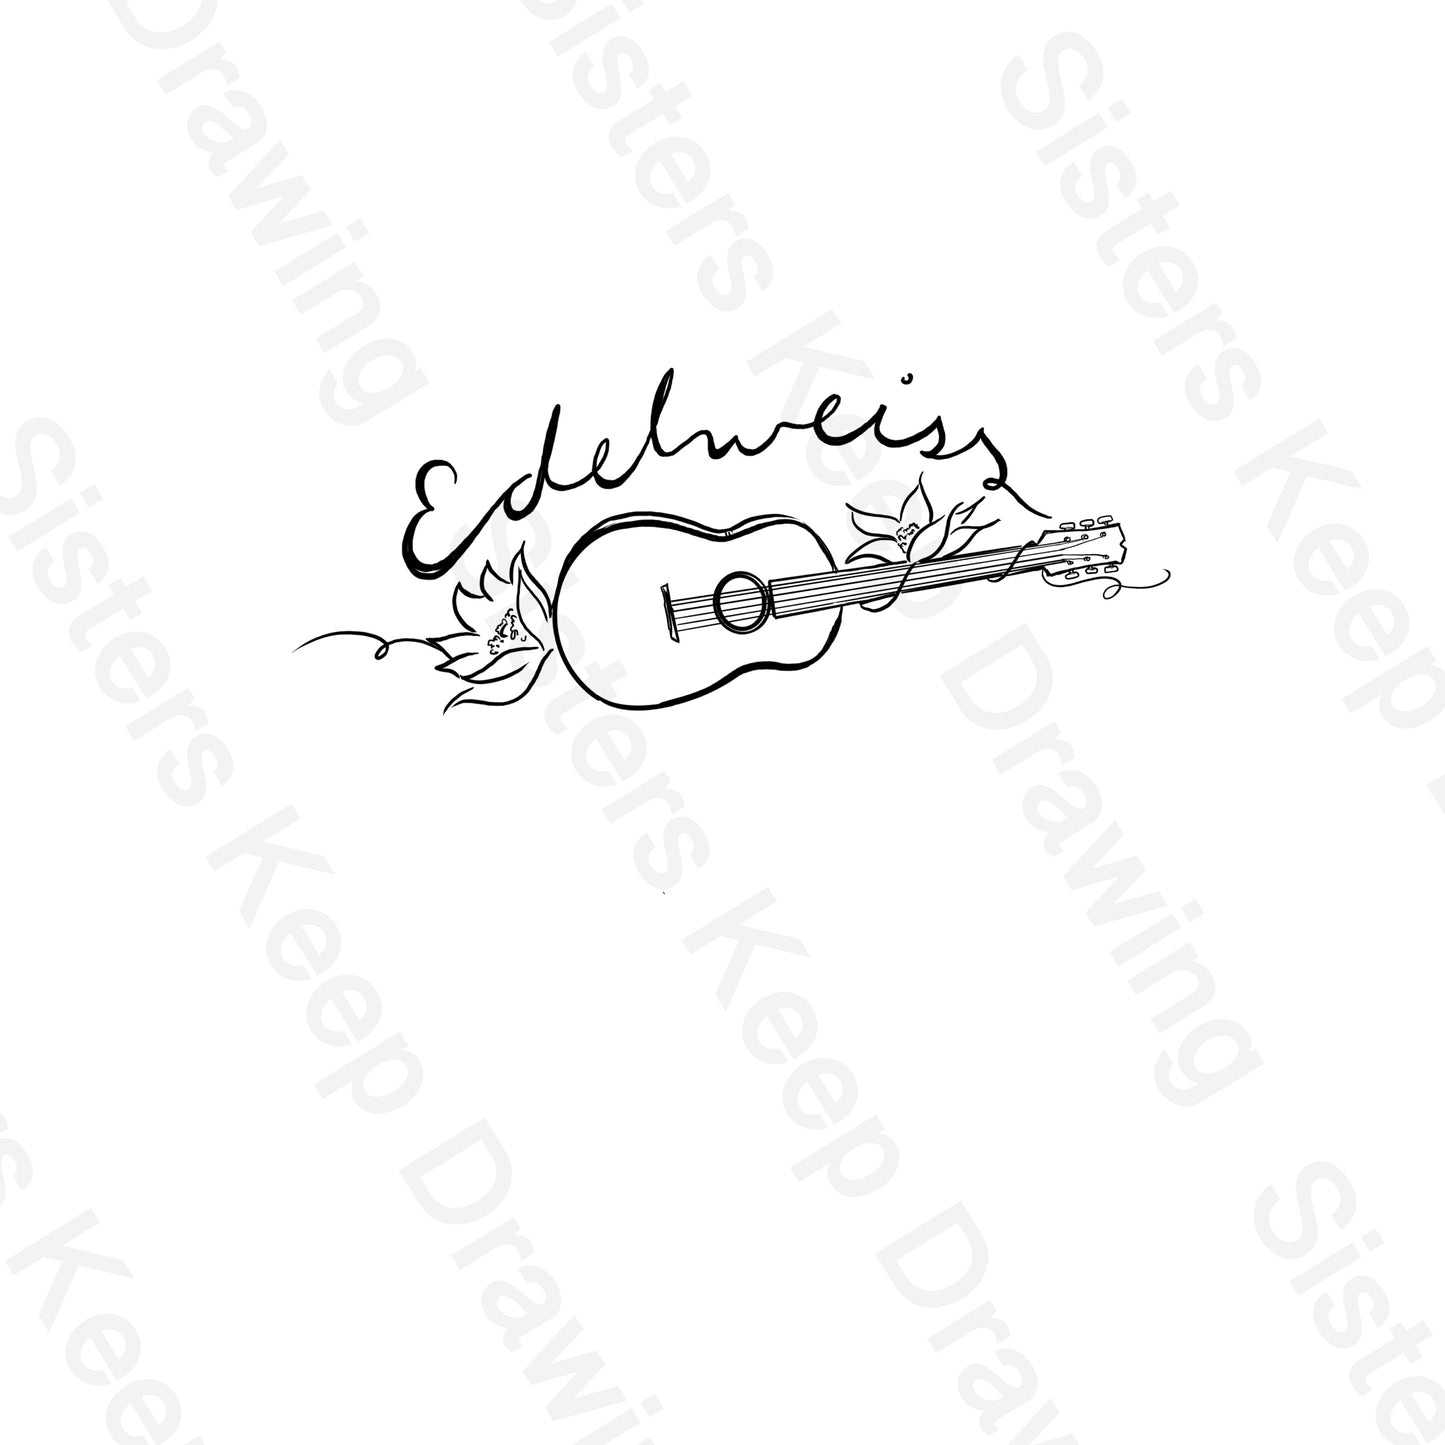 Edelweiss- Sound of Music Inspired Tattoo Transparent PNG- instant download digital printable artwork